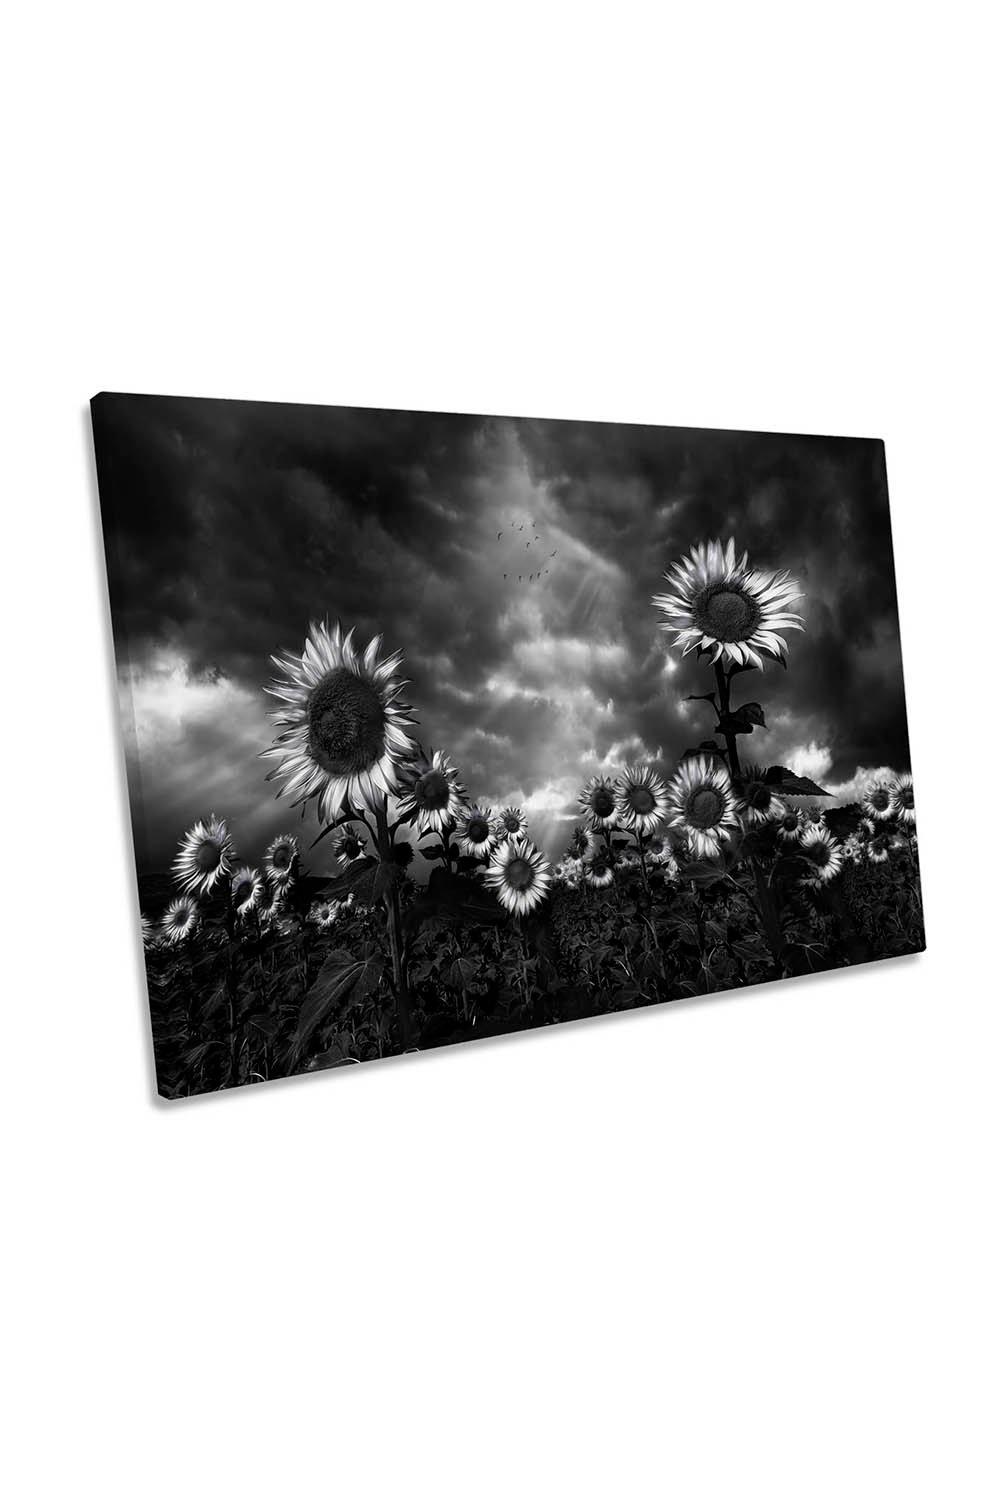 Sunflowers Floral Black and White Canvas Wall Art Picture Print